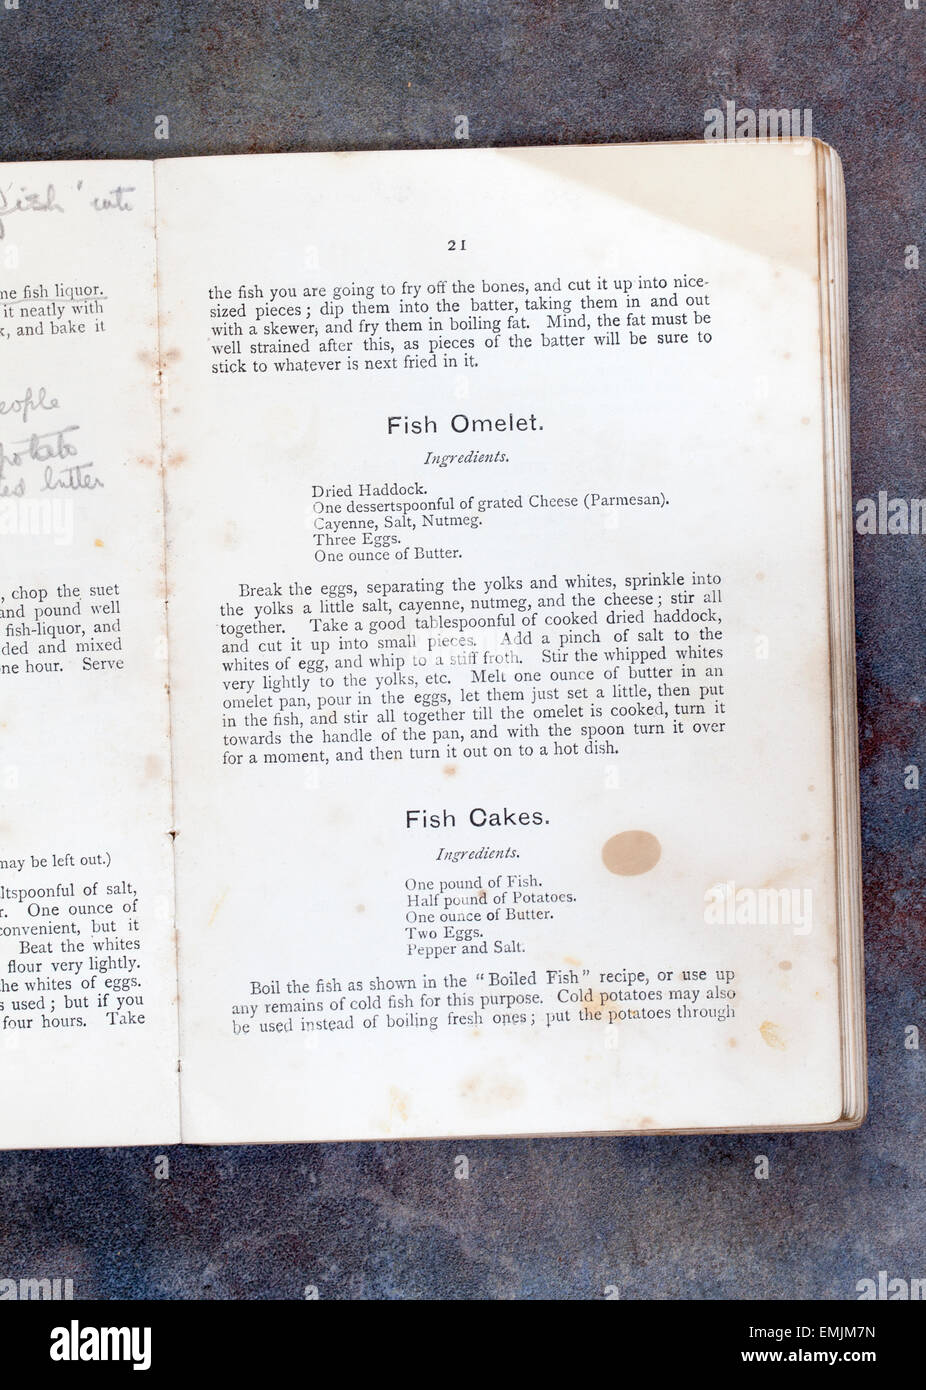 Plain Cookery Recipes Book by Mrs Charles Clarke for the National Training School for Cookery Stock Photo